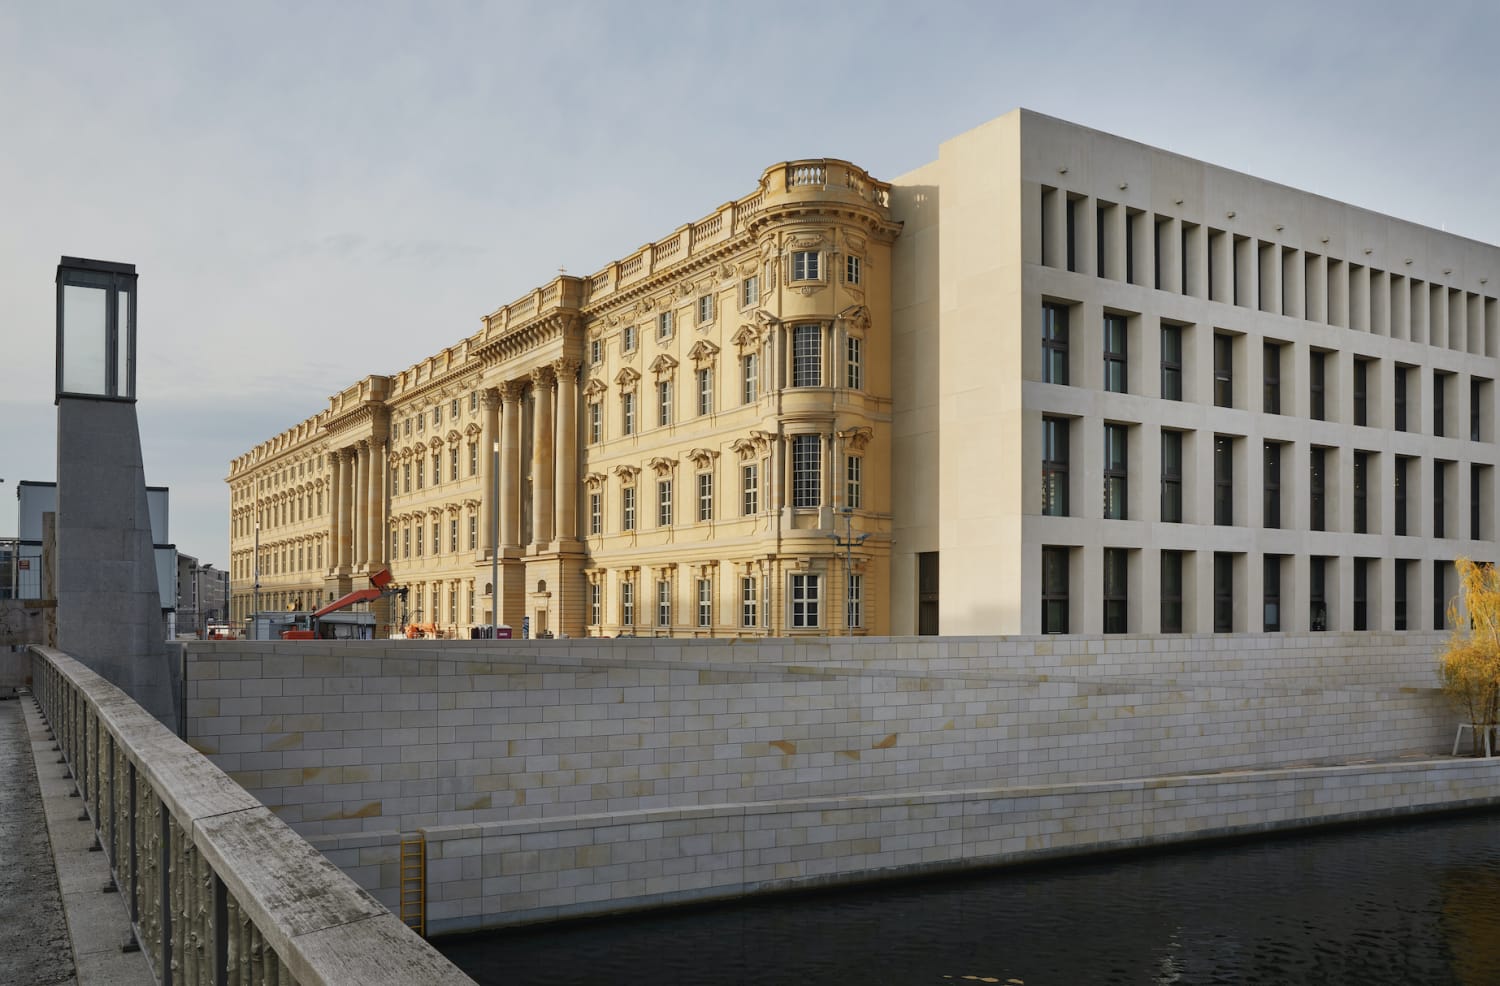 The highly controversial *reconstructed* Berliner Stadtschloss, 2020 (Originally started 1433 but heavily modified, salvageable demolished 1950 because of ideological conflict.) Contemporary architecture haven't necessarily evolved naturally like before, but instead taken an different path entirely.